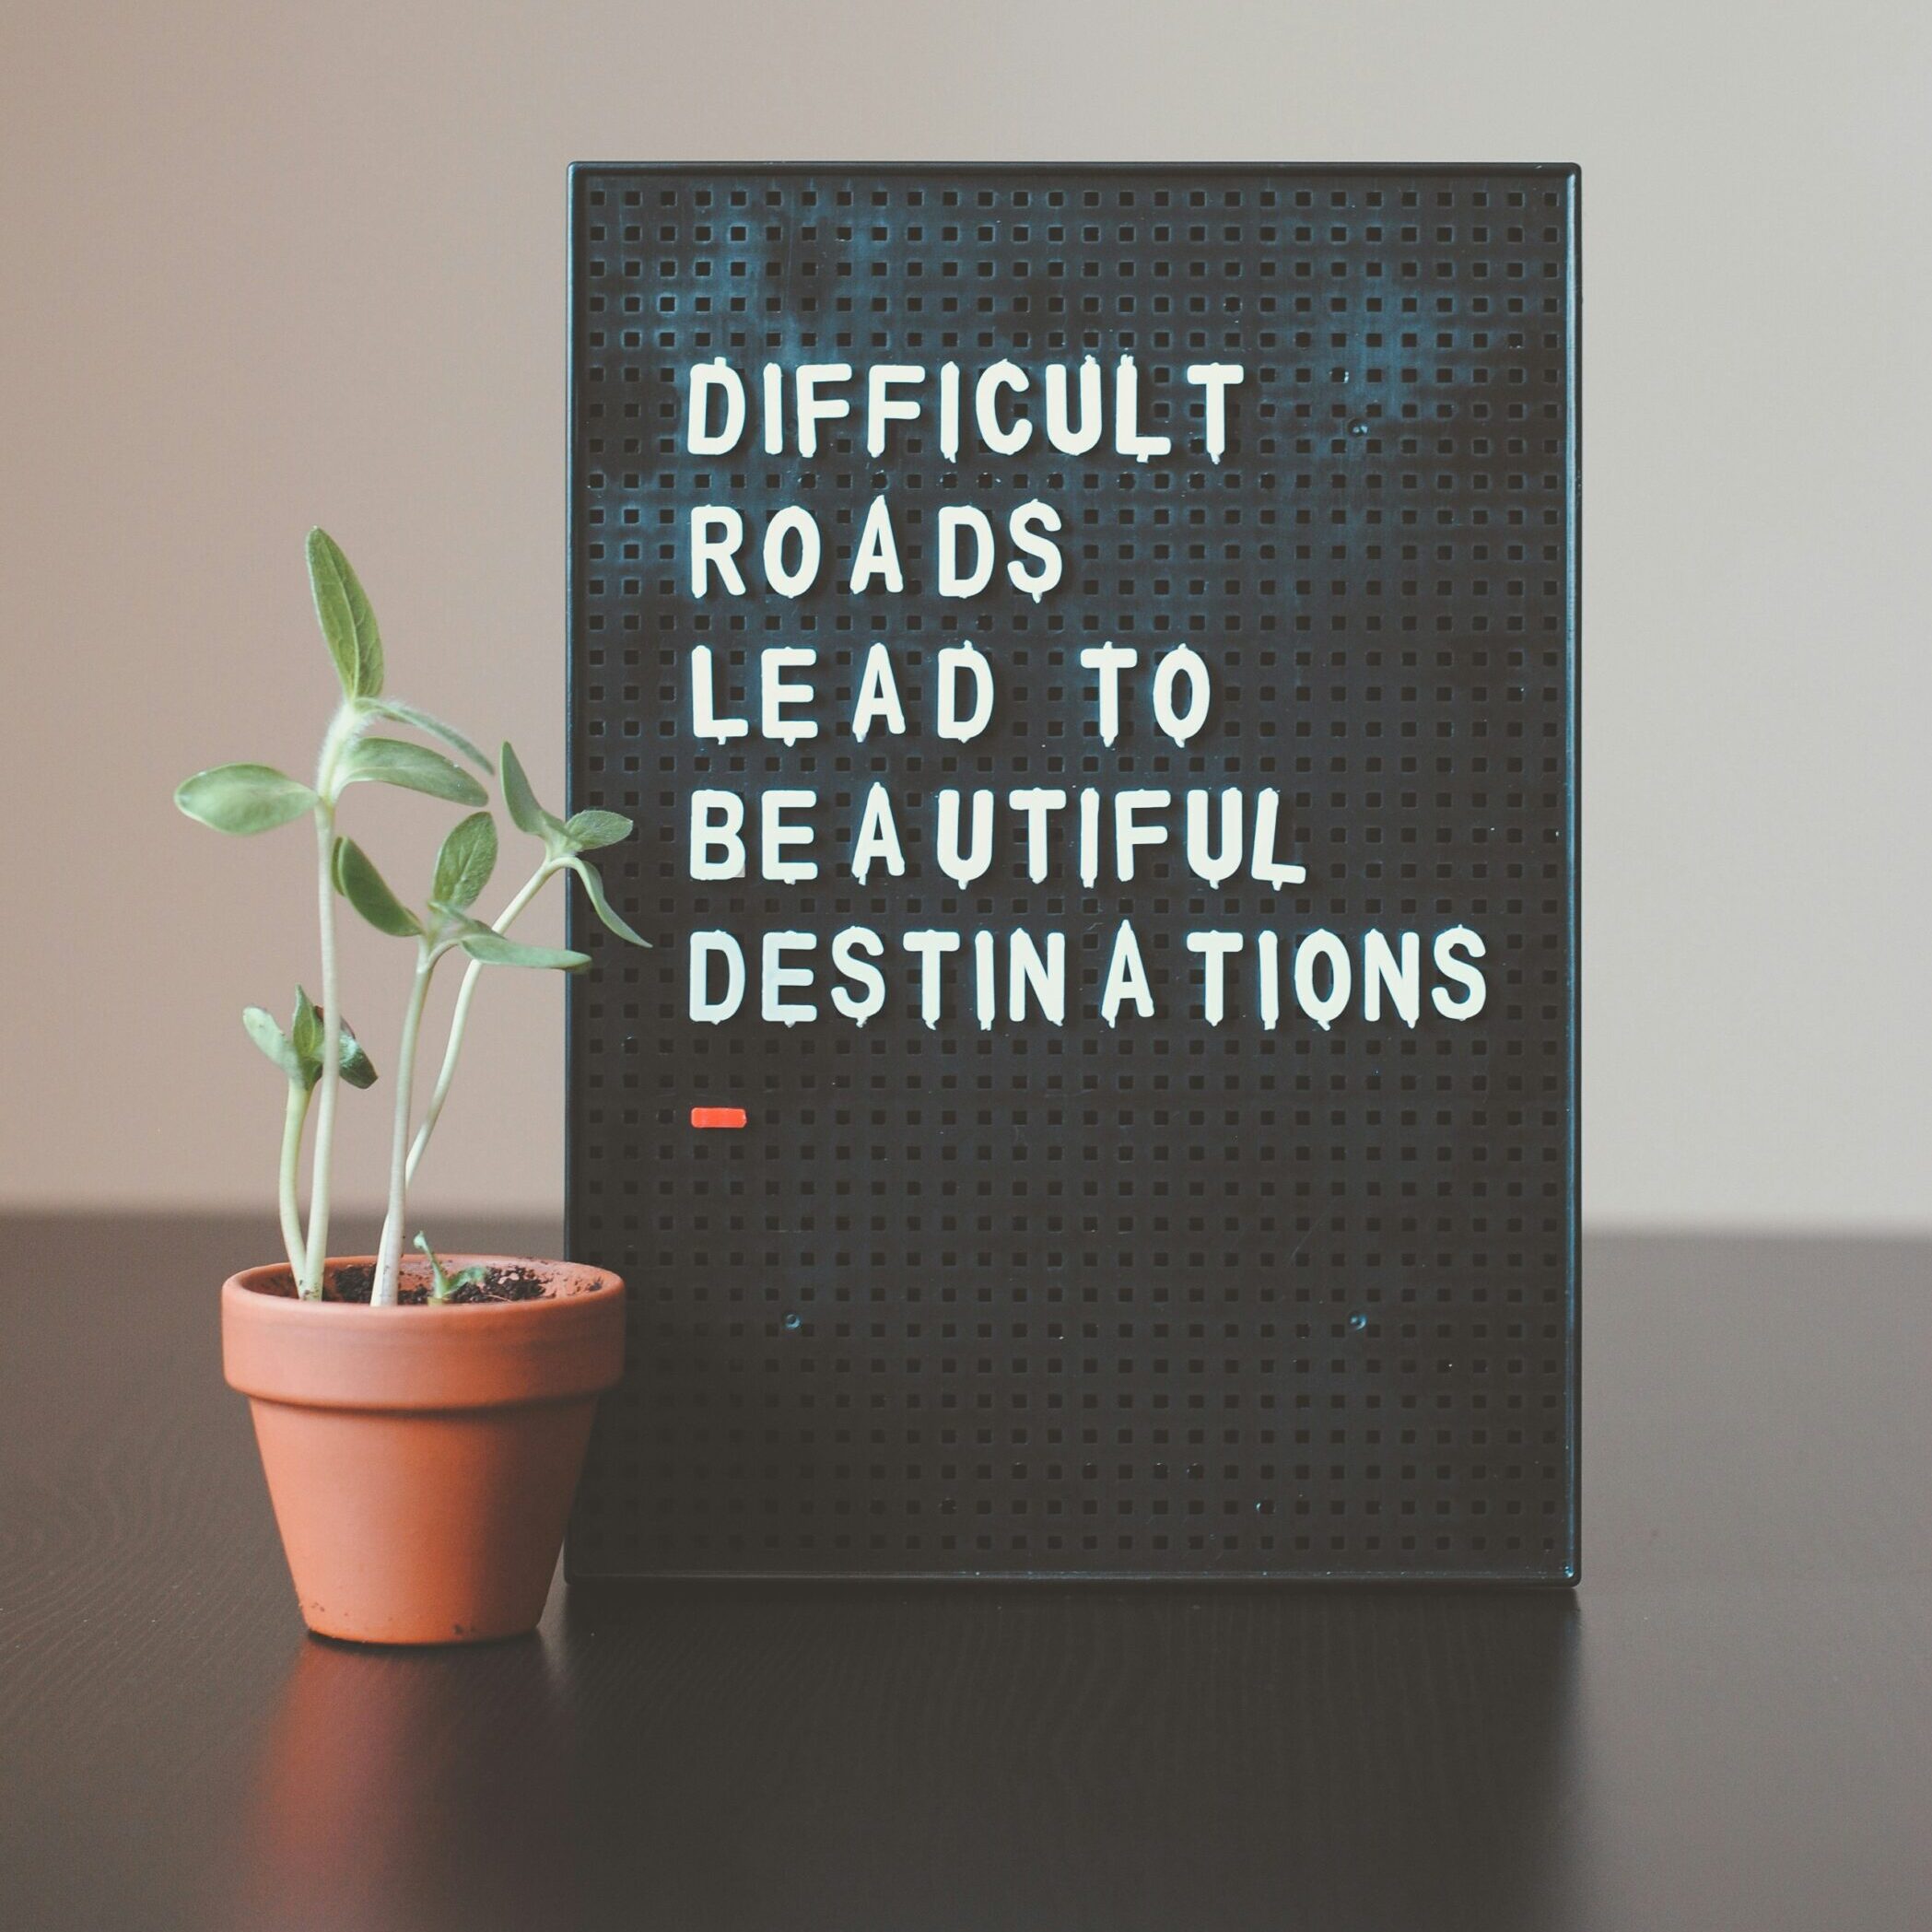 Difficult roads lead to beautiful destinations with a potted plant.